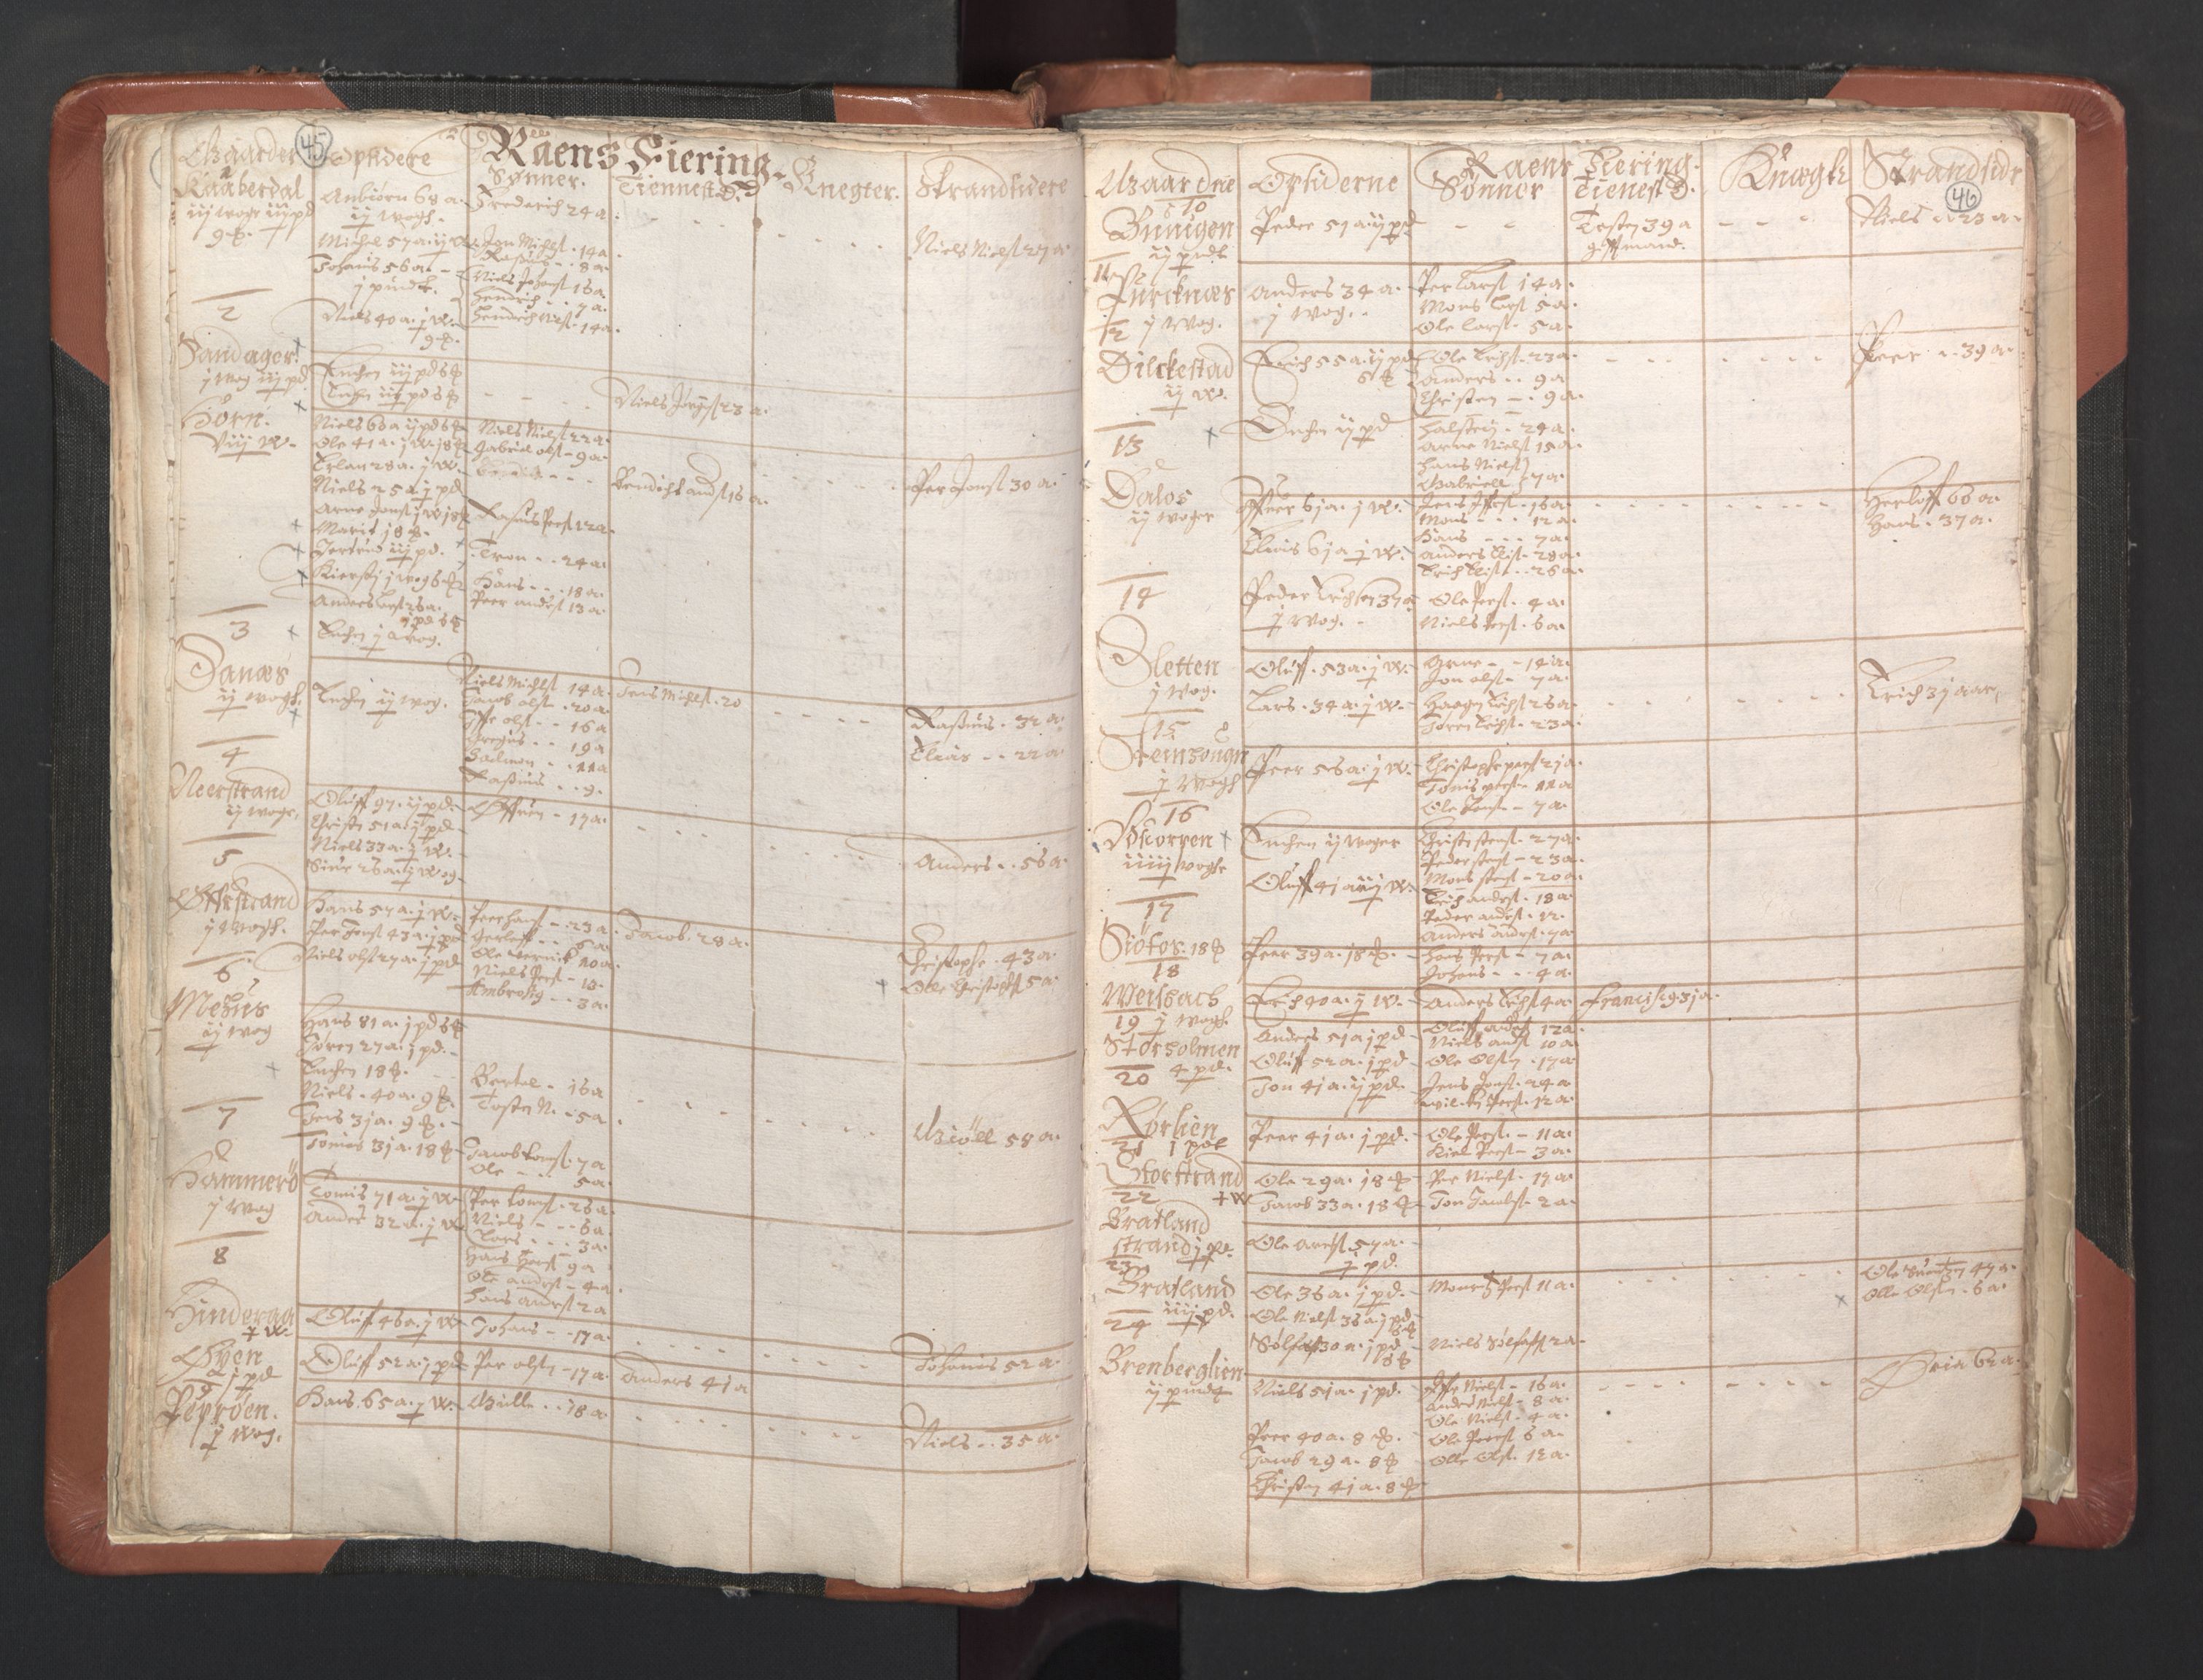 RA, Vicar's Census 1664-1666, no. 35: Helgeland deanery and Salten deanery, 1664-1666, p. 45-46